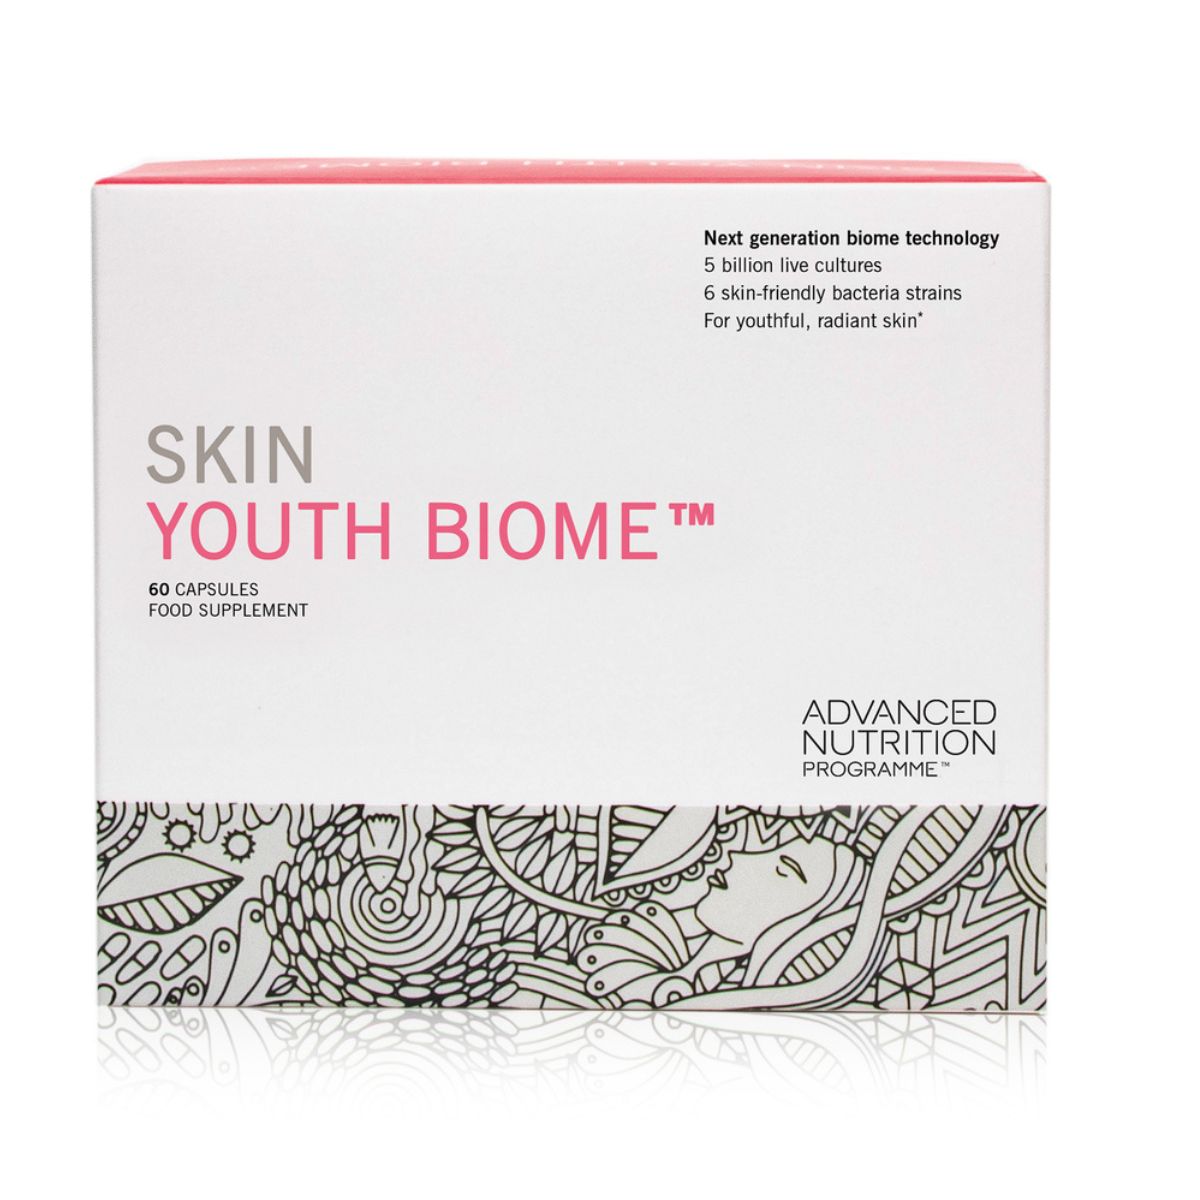 Advanced Nutrition Programme Bestseller Skin Youth Biome New & Improved 60 Capsules